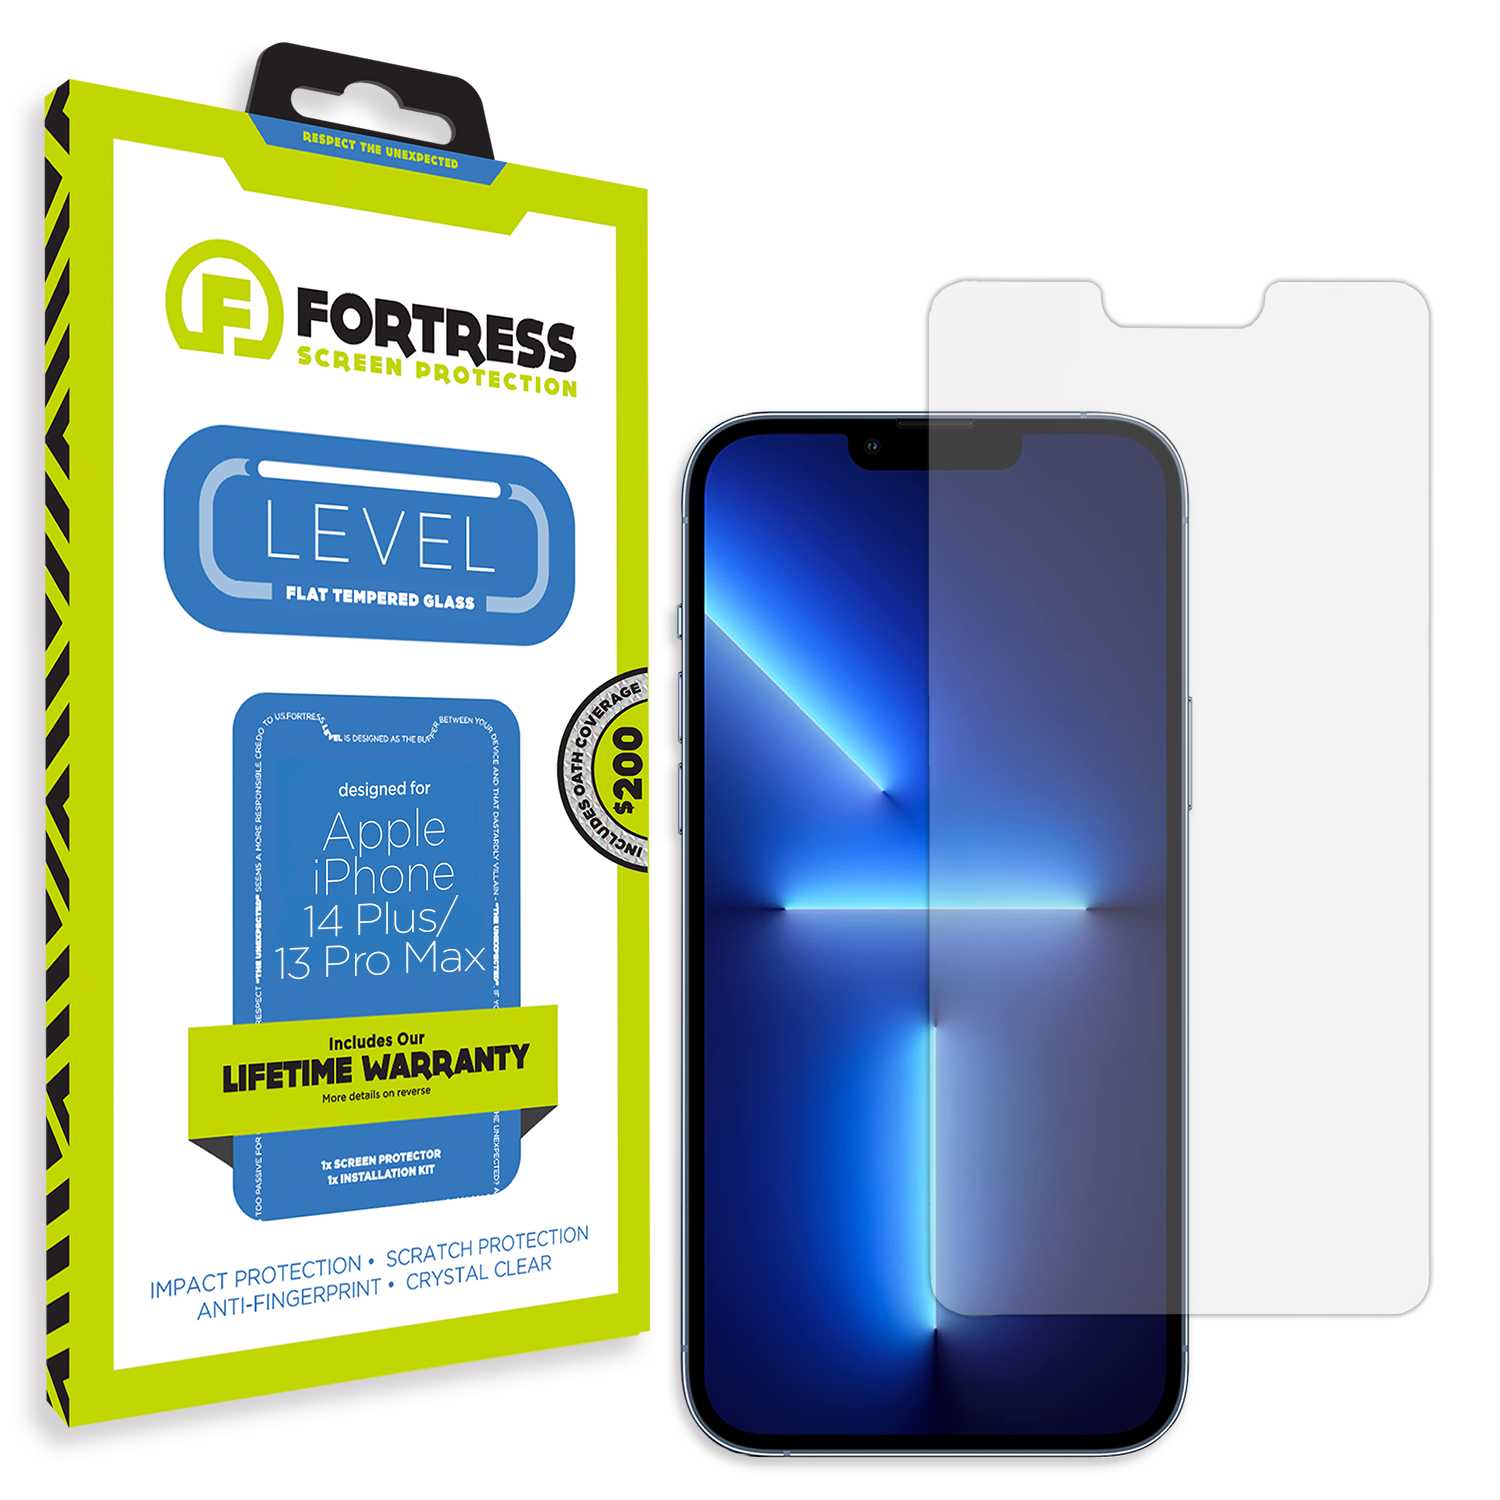 Fortress iPhone 13 Pro Max Screen Protector $200Coverage Scooch Screen Protector